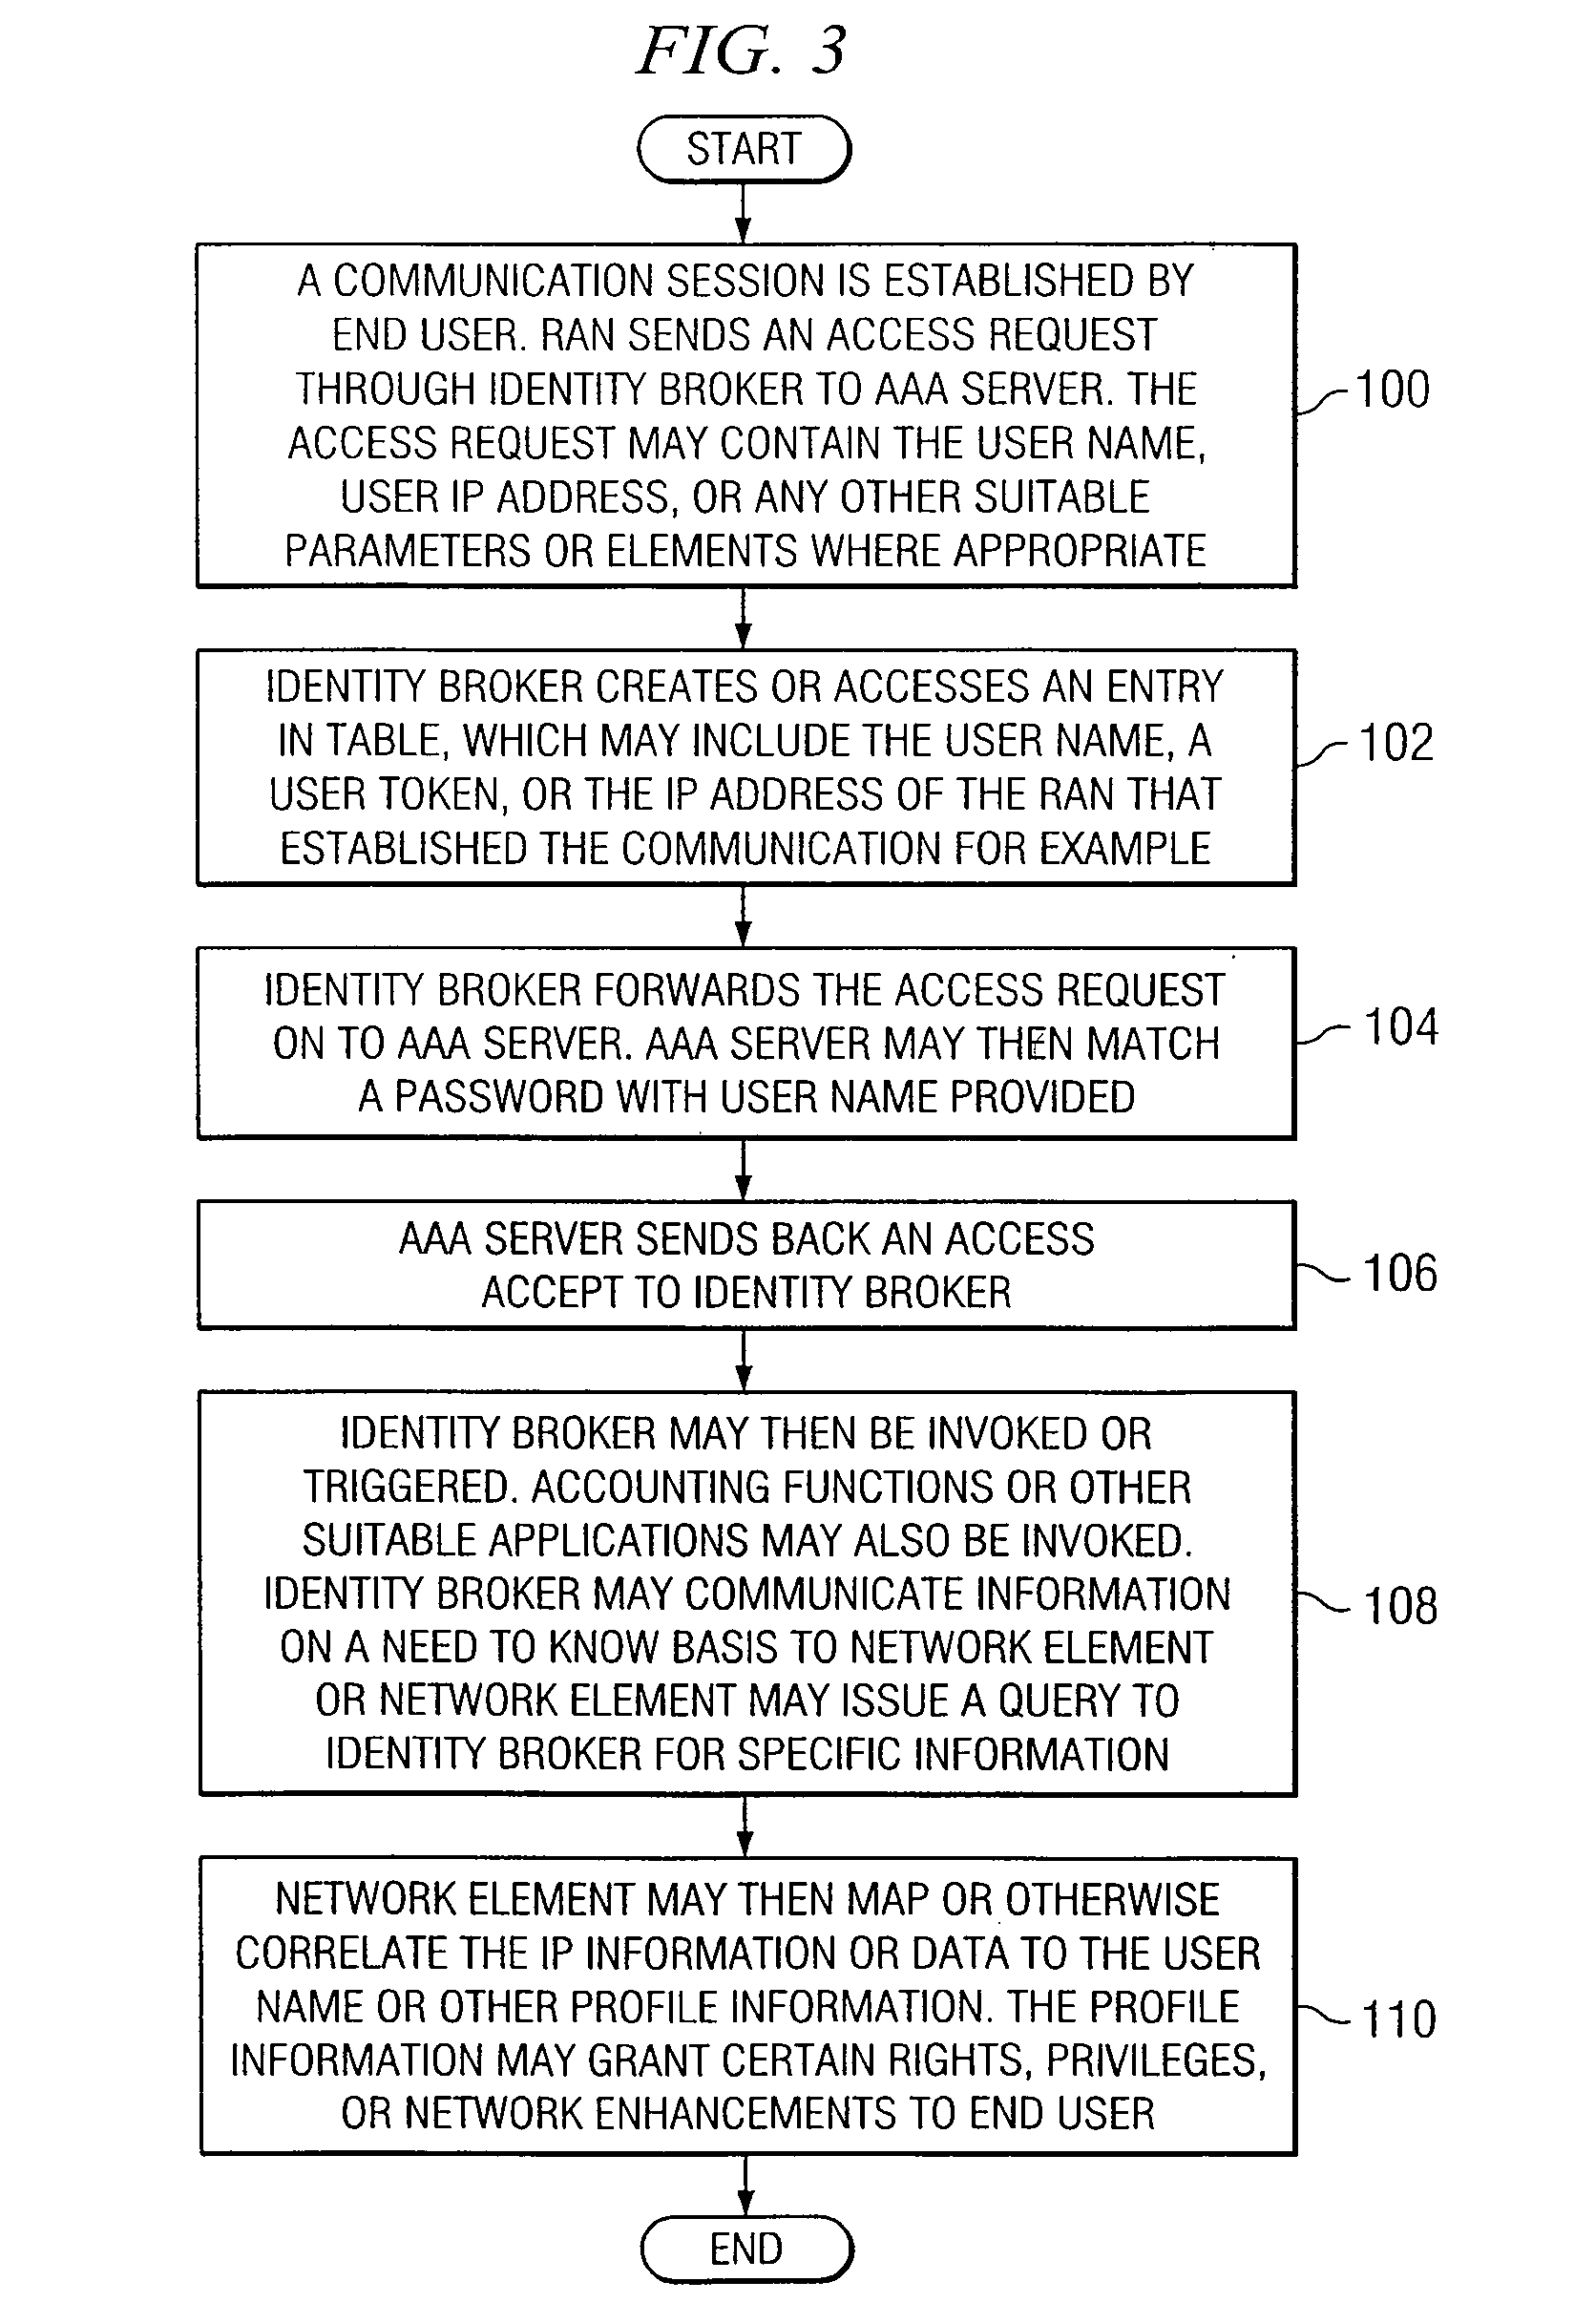 System and Method for Distributing Information in a Network Environment